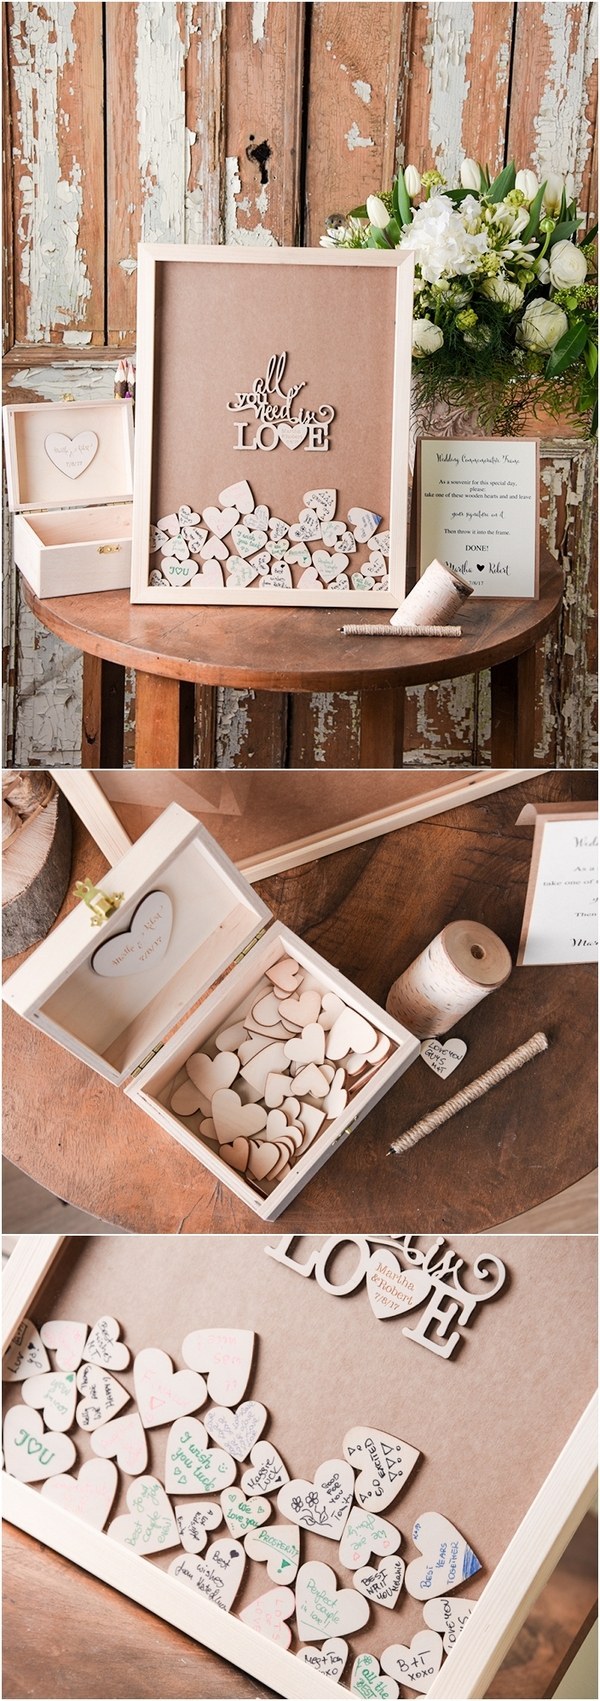 Rustic Laser Cut Wood Wedding Guest Book- All you need is love